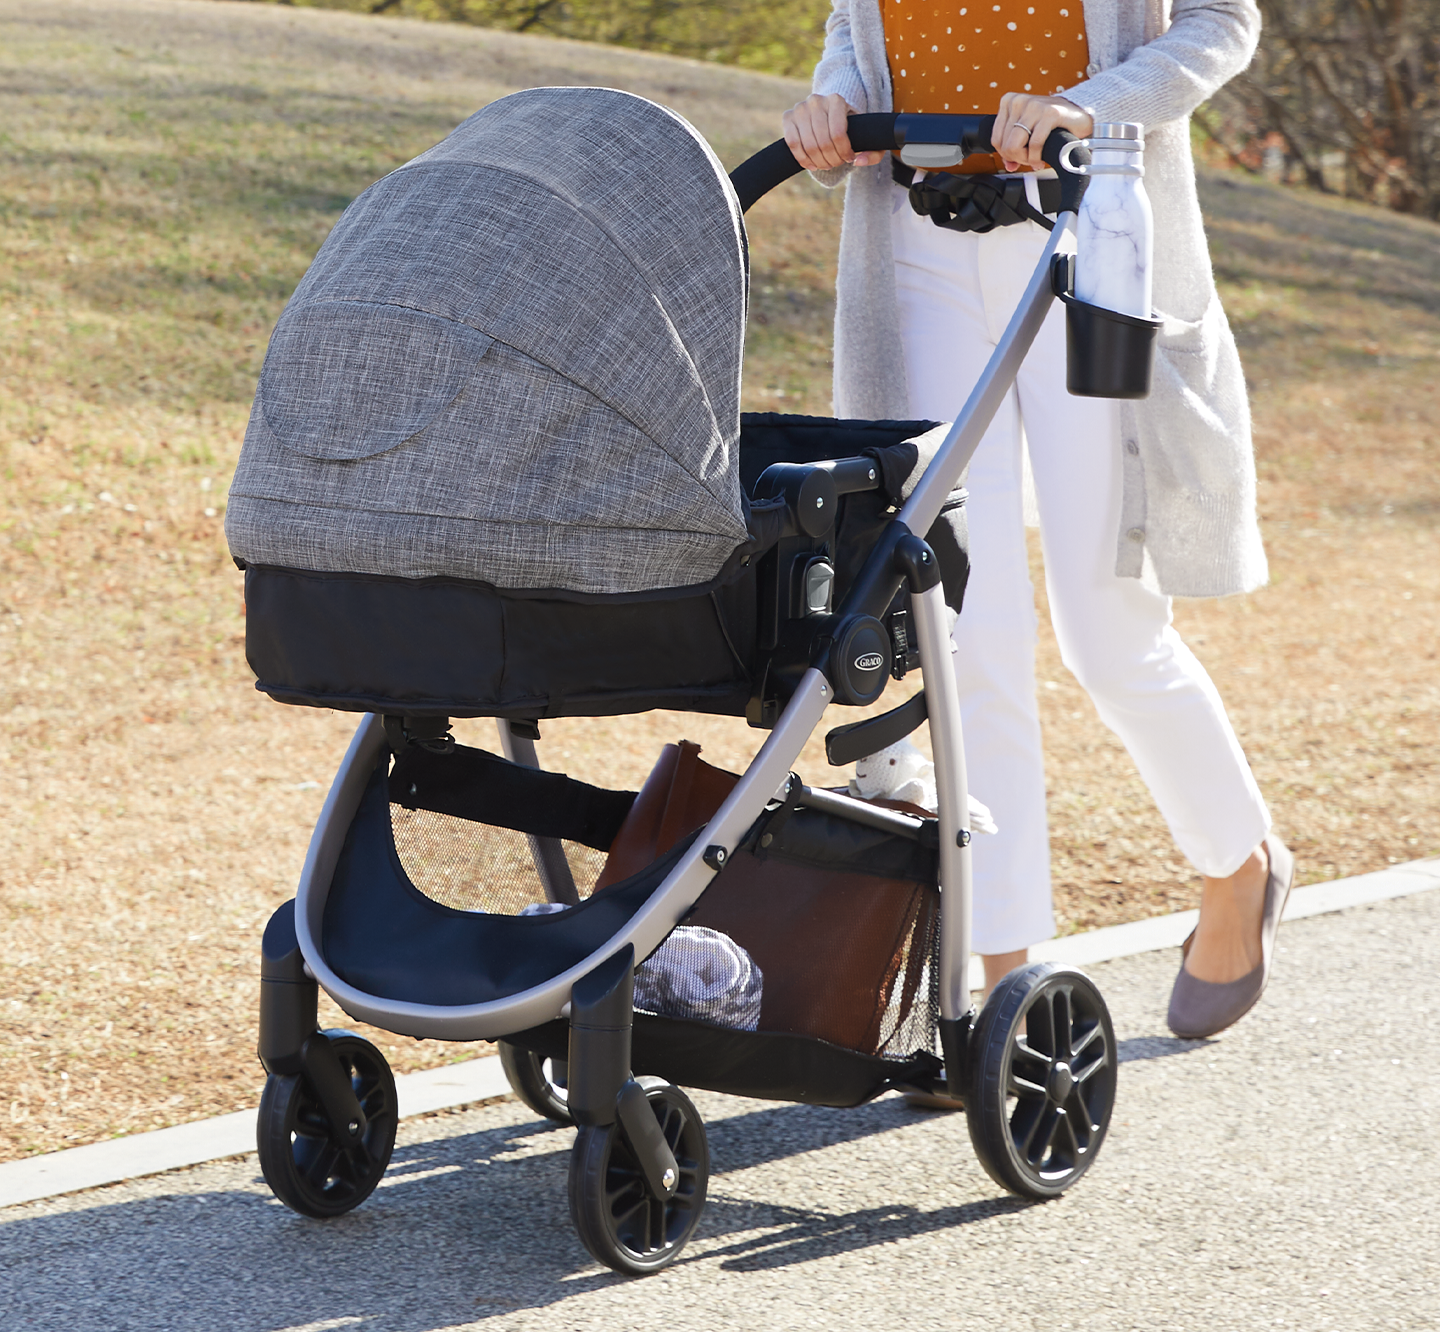 how to use graco stroller